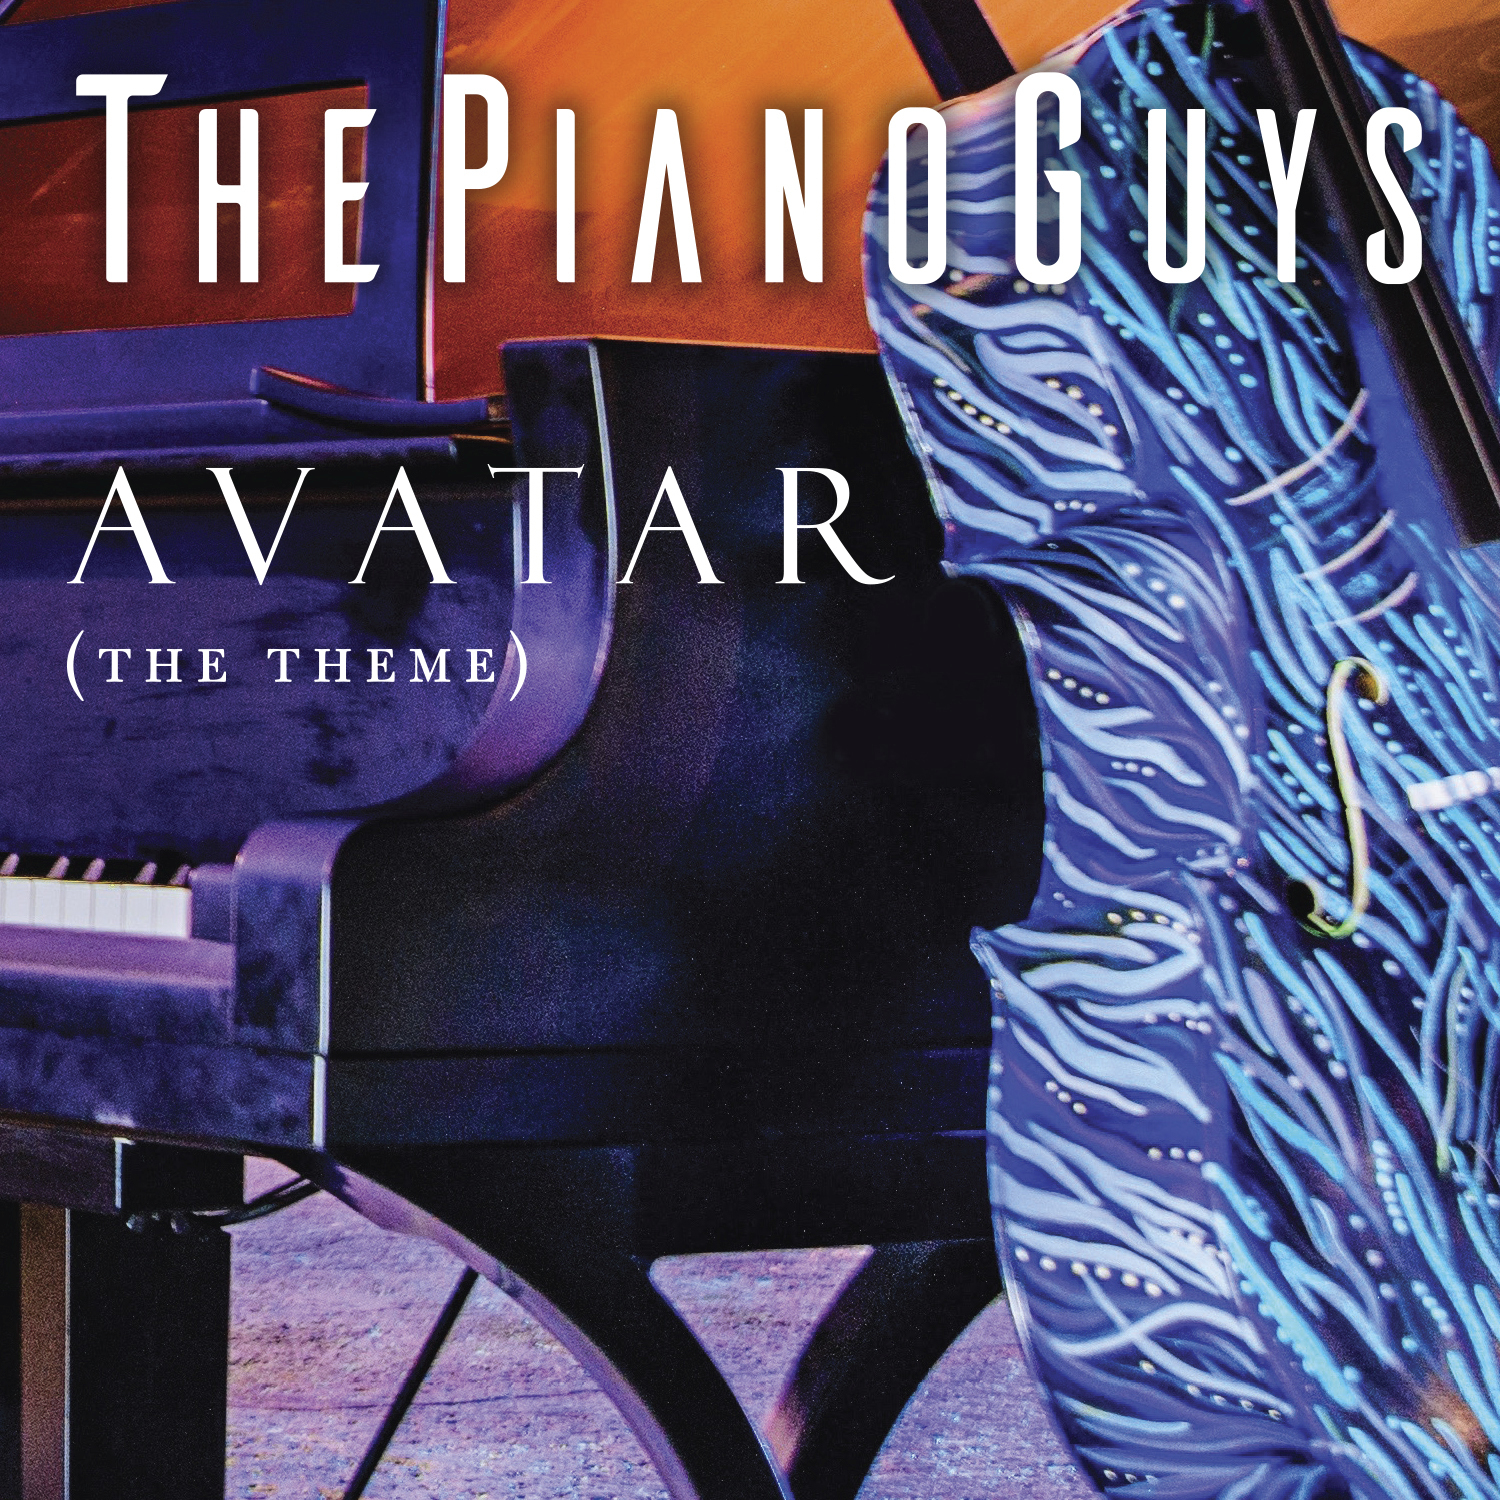 The Piano Guys Take on Avatar!